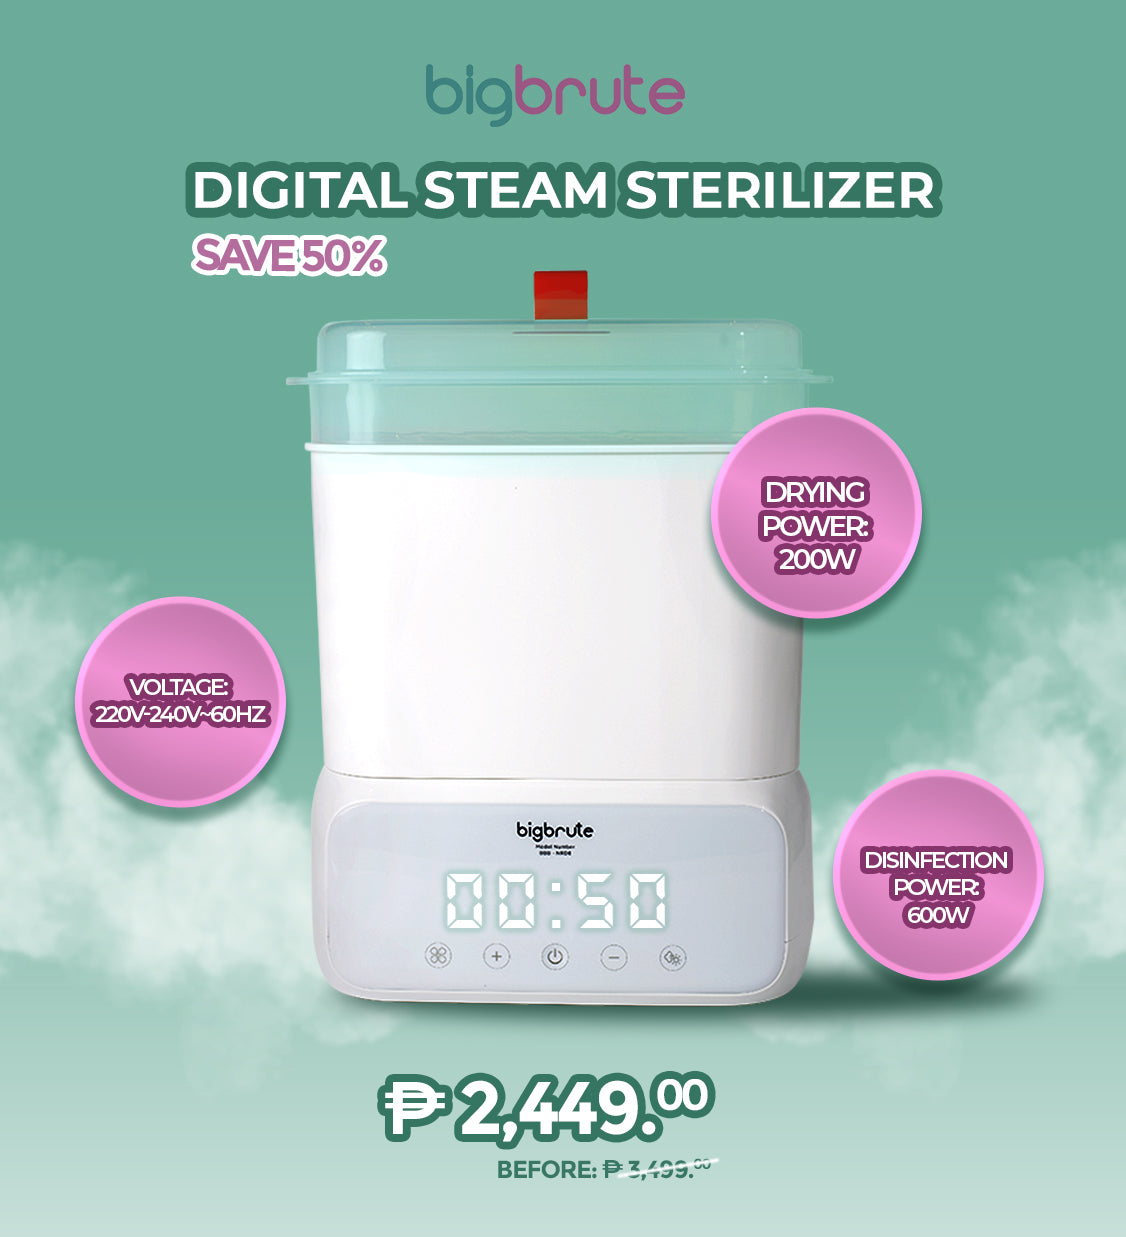 Understanding the Advantages of a Digital Steam Sterilizer for Your Baby's Health